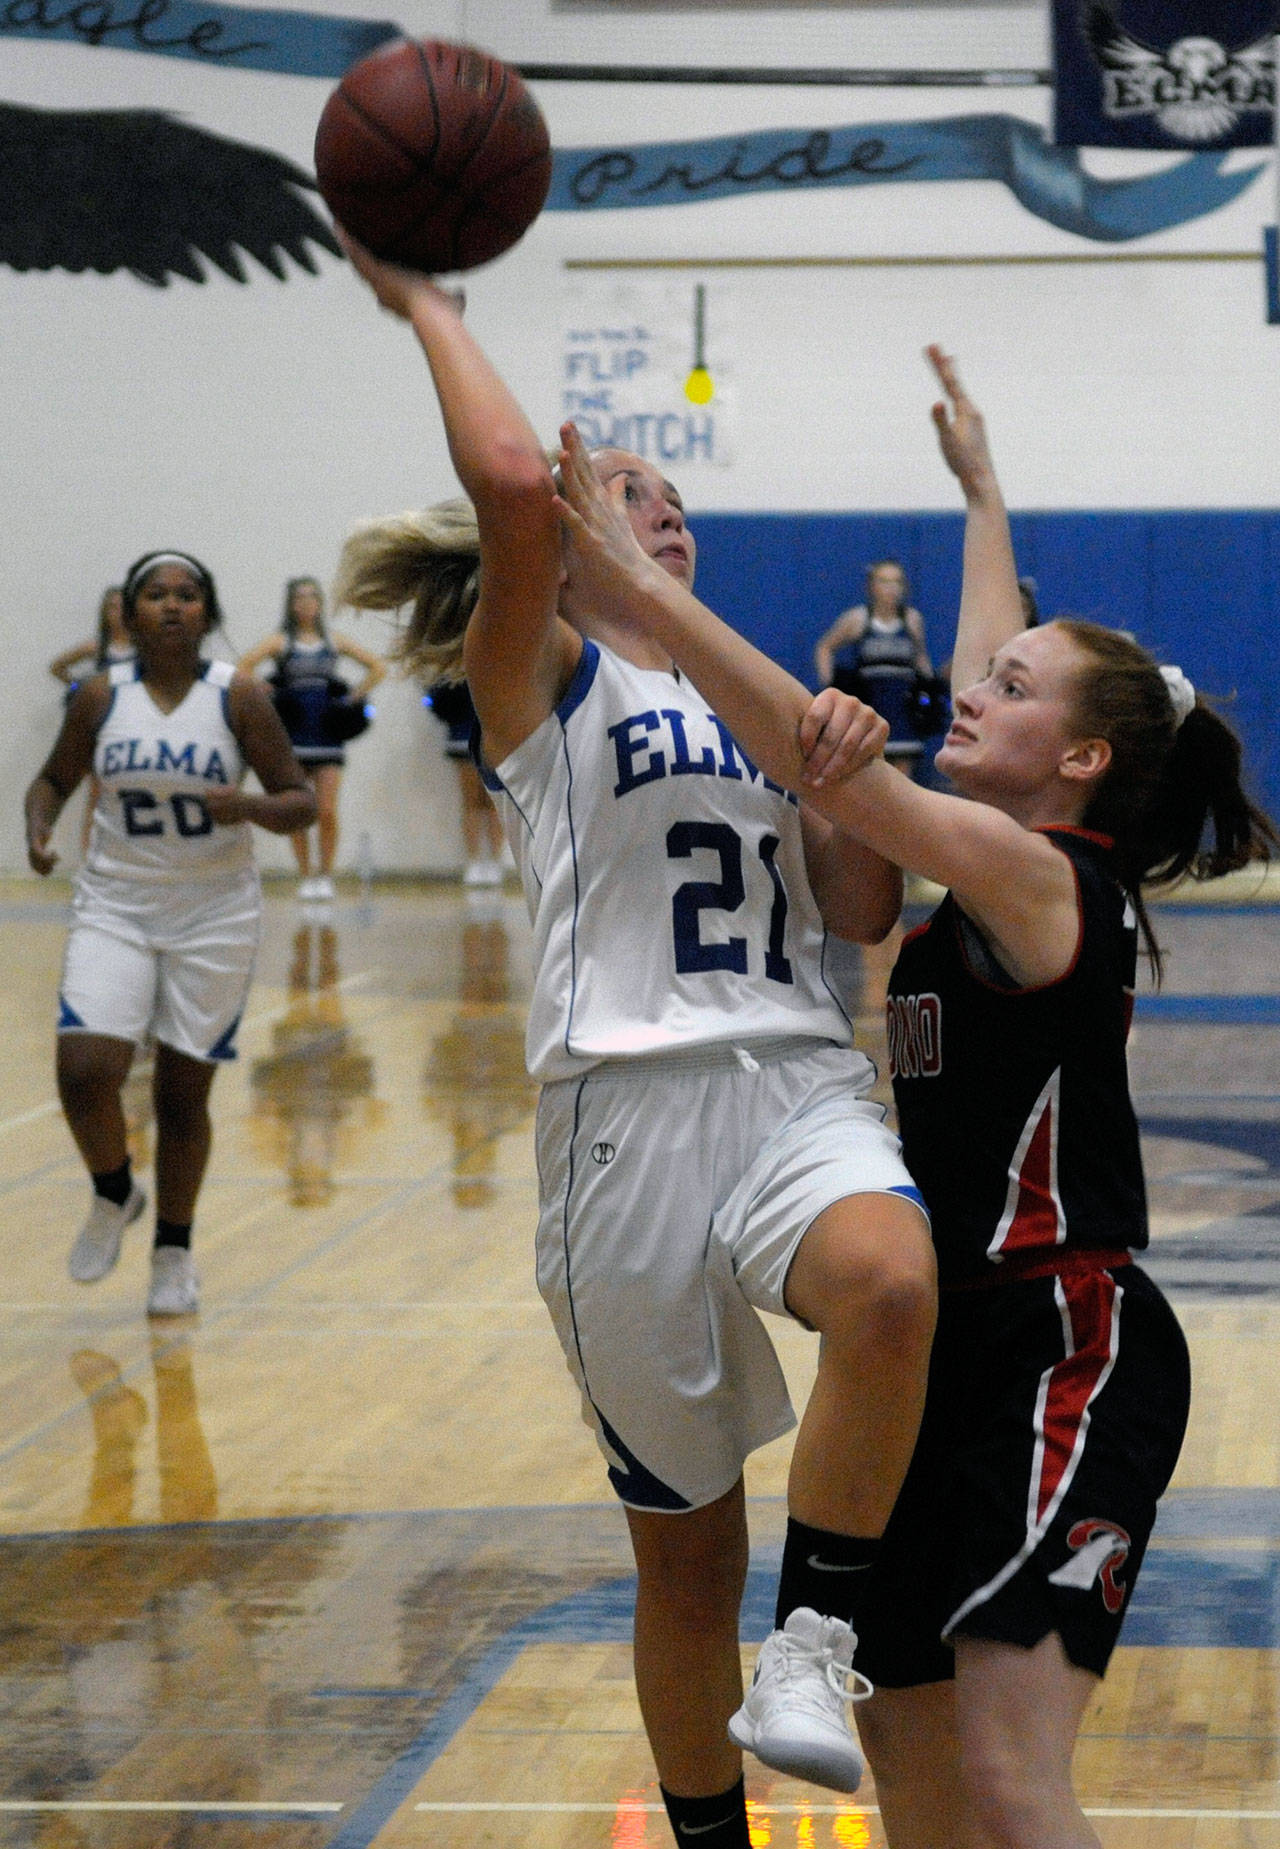 Elma’s Kayli Jonhnson finishes the layup while defended by Raymond’s Izzy Silvernail in the first quarter on Tuesday night. (Hasani Grayson | Grays Harbor News Group)